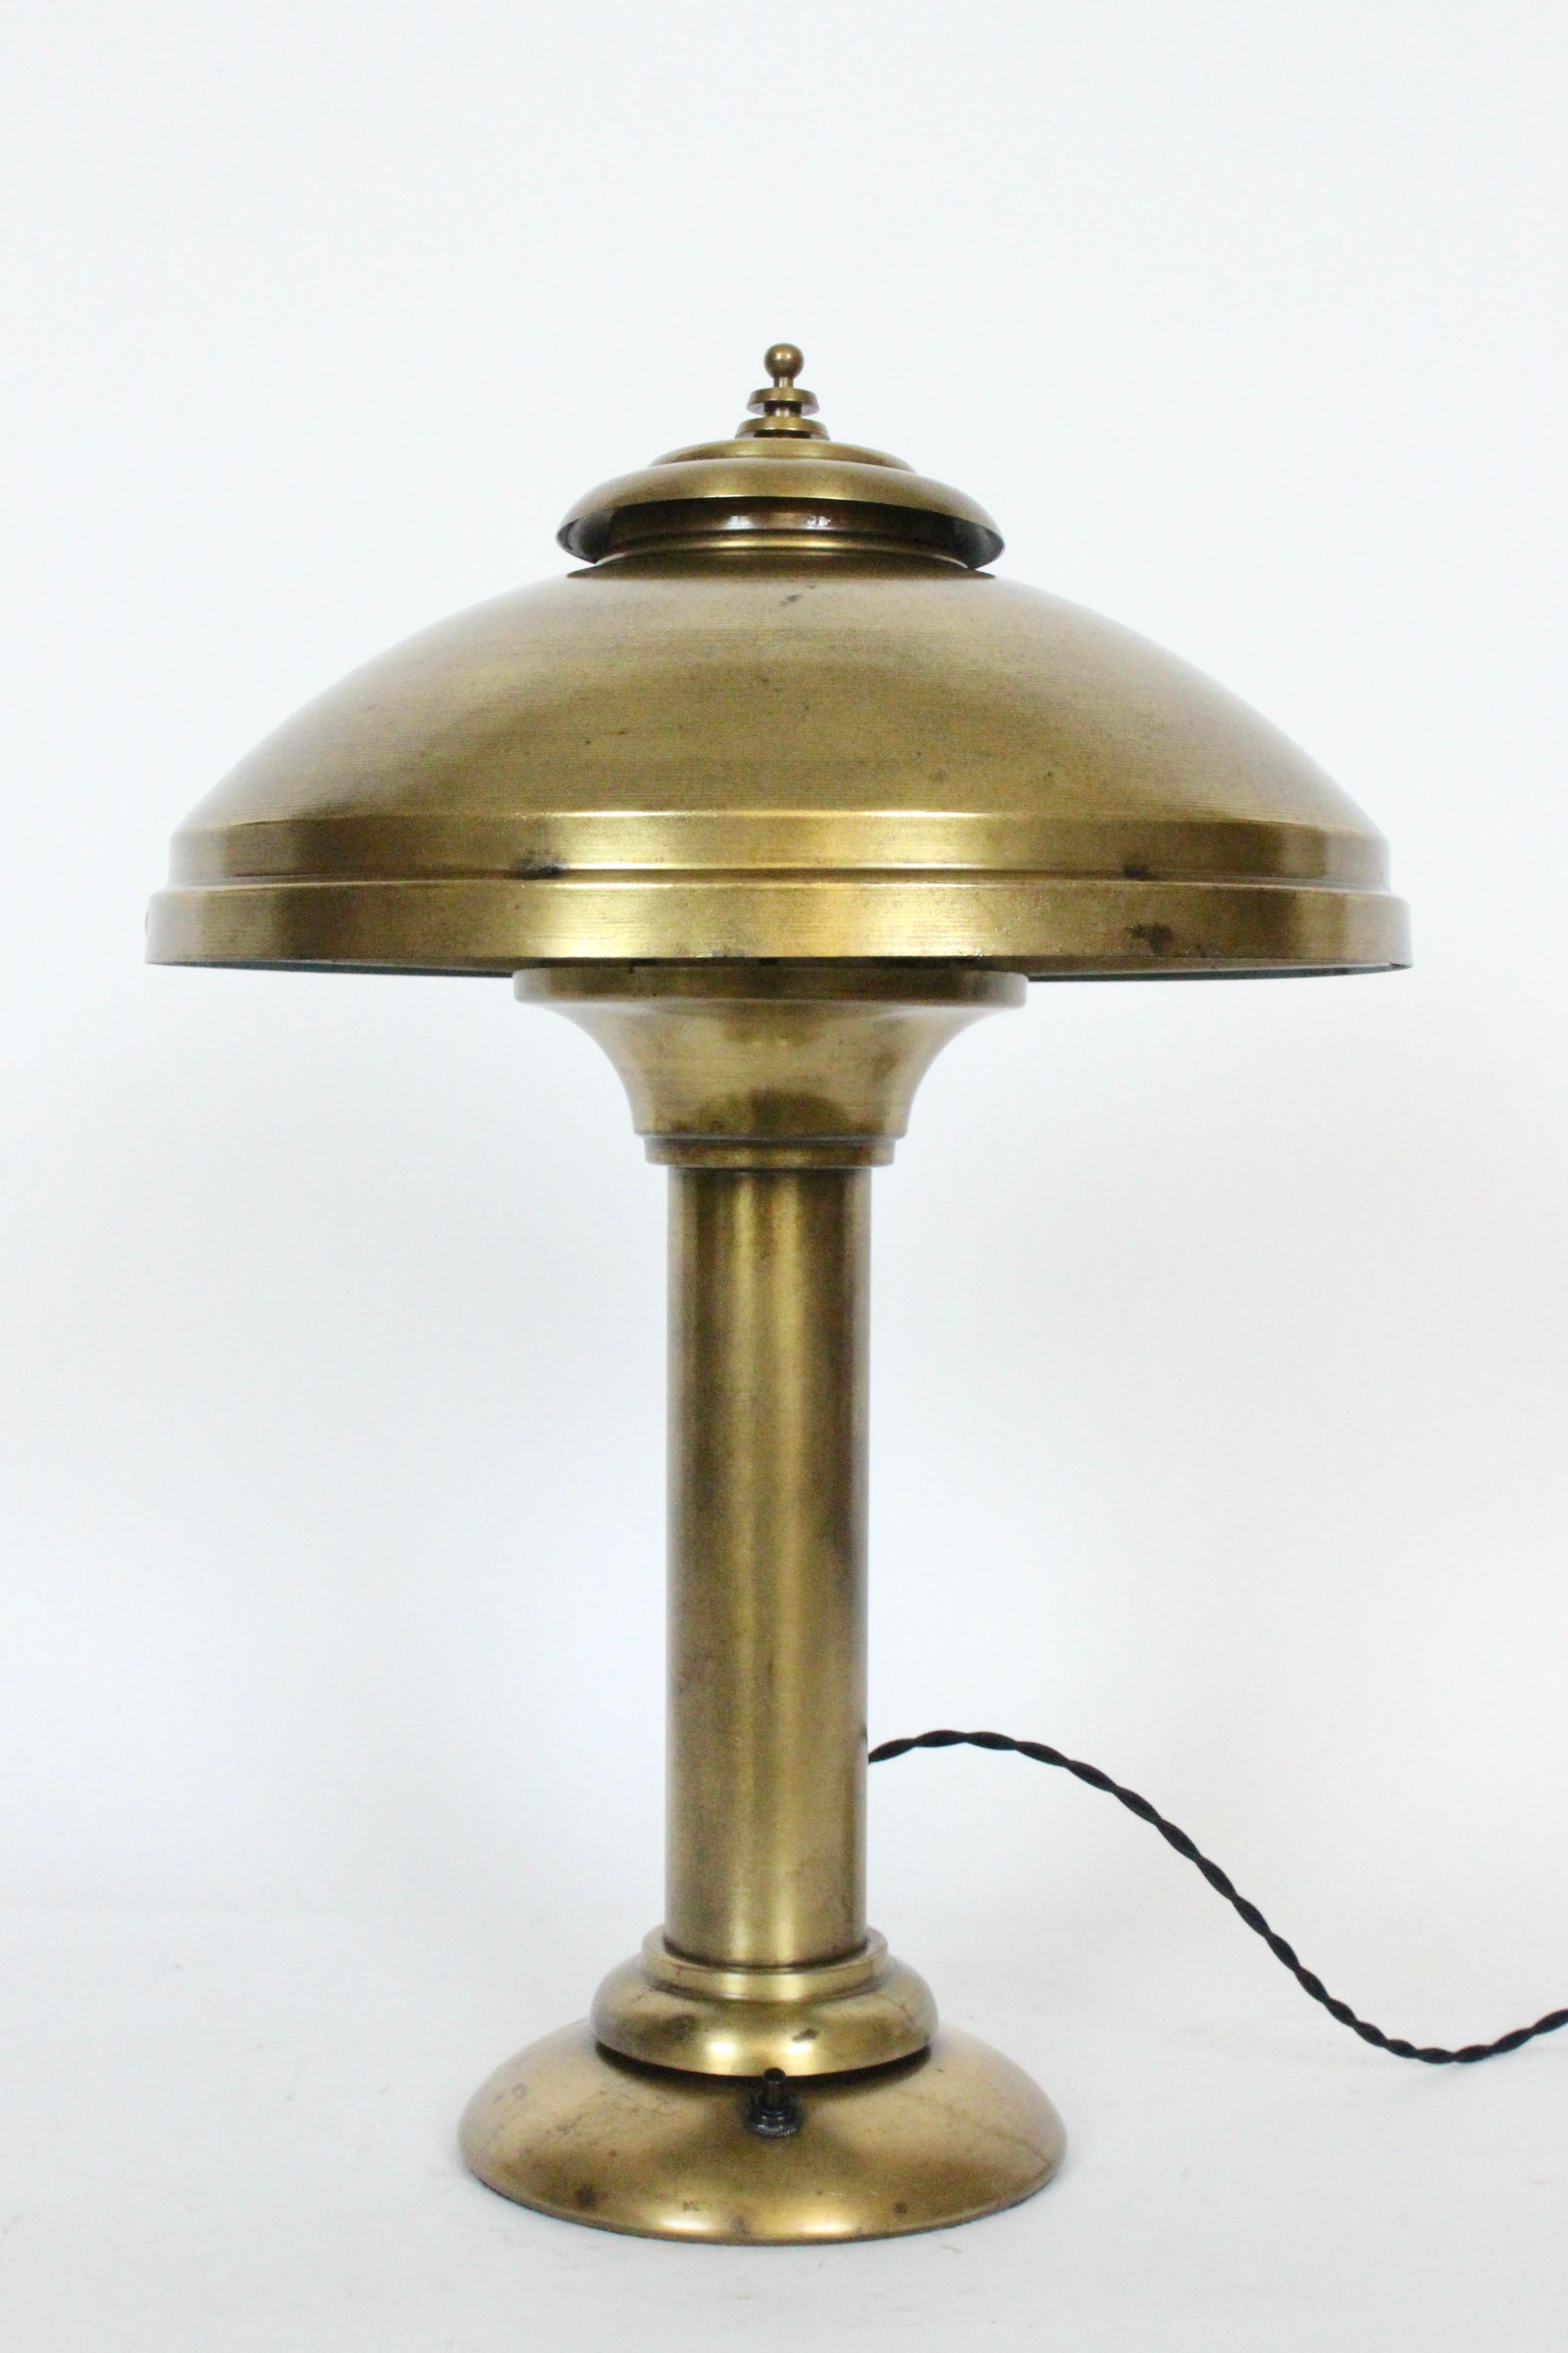 Enameled Fairies Mfg. Co. Cantilever All Brass Shaded Desk Lamp, 1920s For Sale